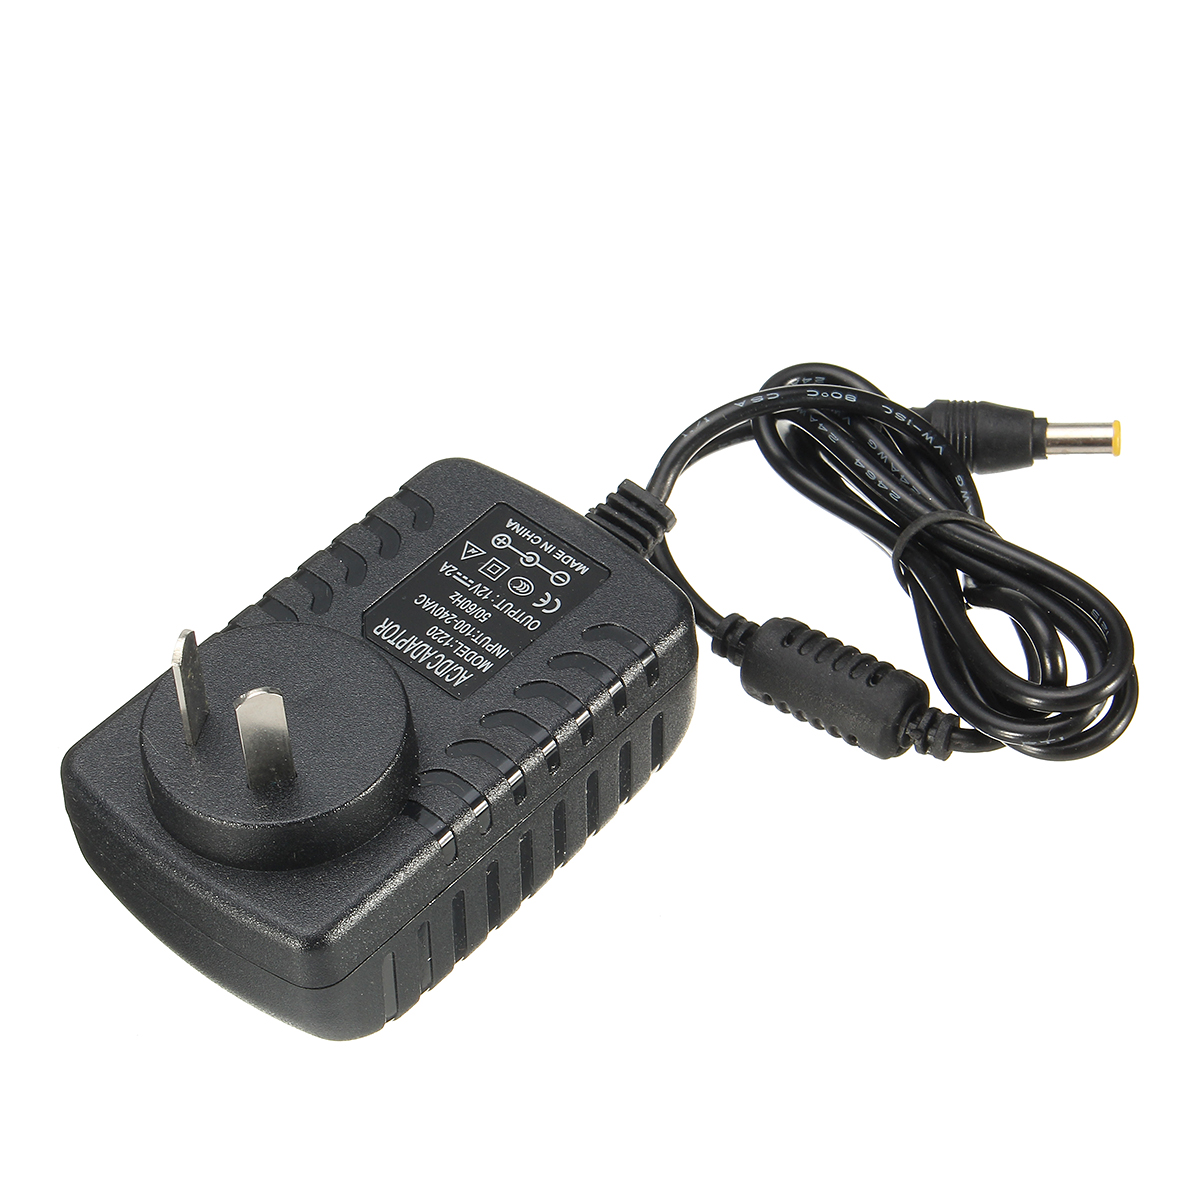 12V-2A-Adapter-for-Makita-BMR100-BMR101-JobSite-Radio-Switching-Power-Supply-Cord-Wall-Plug-Charger-1363818-6